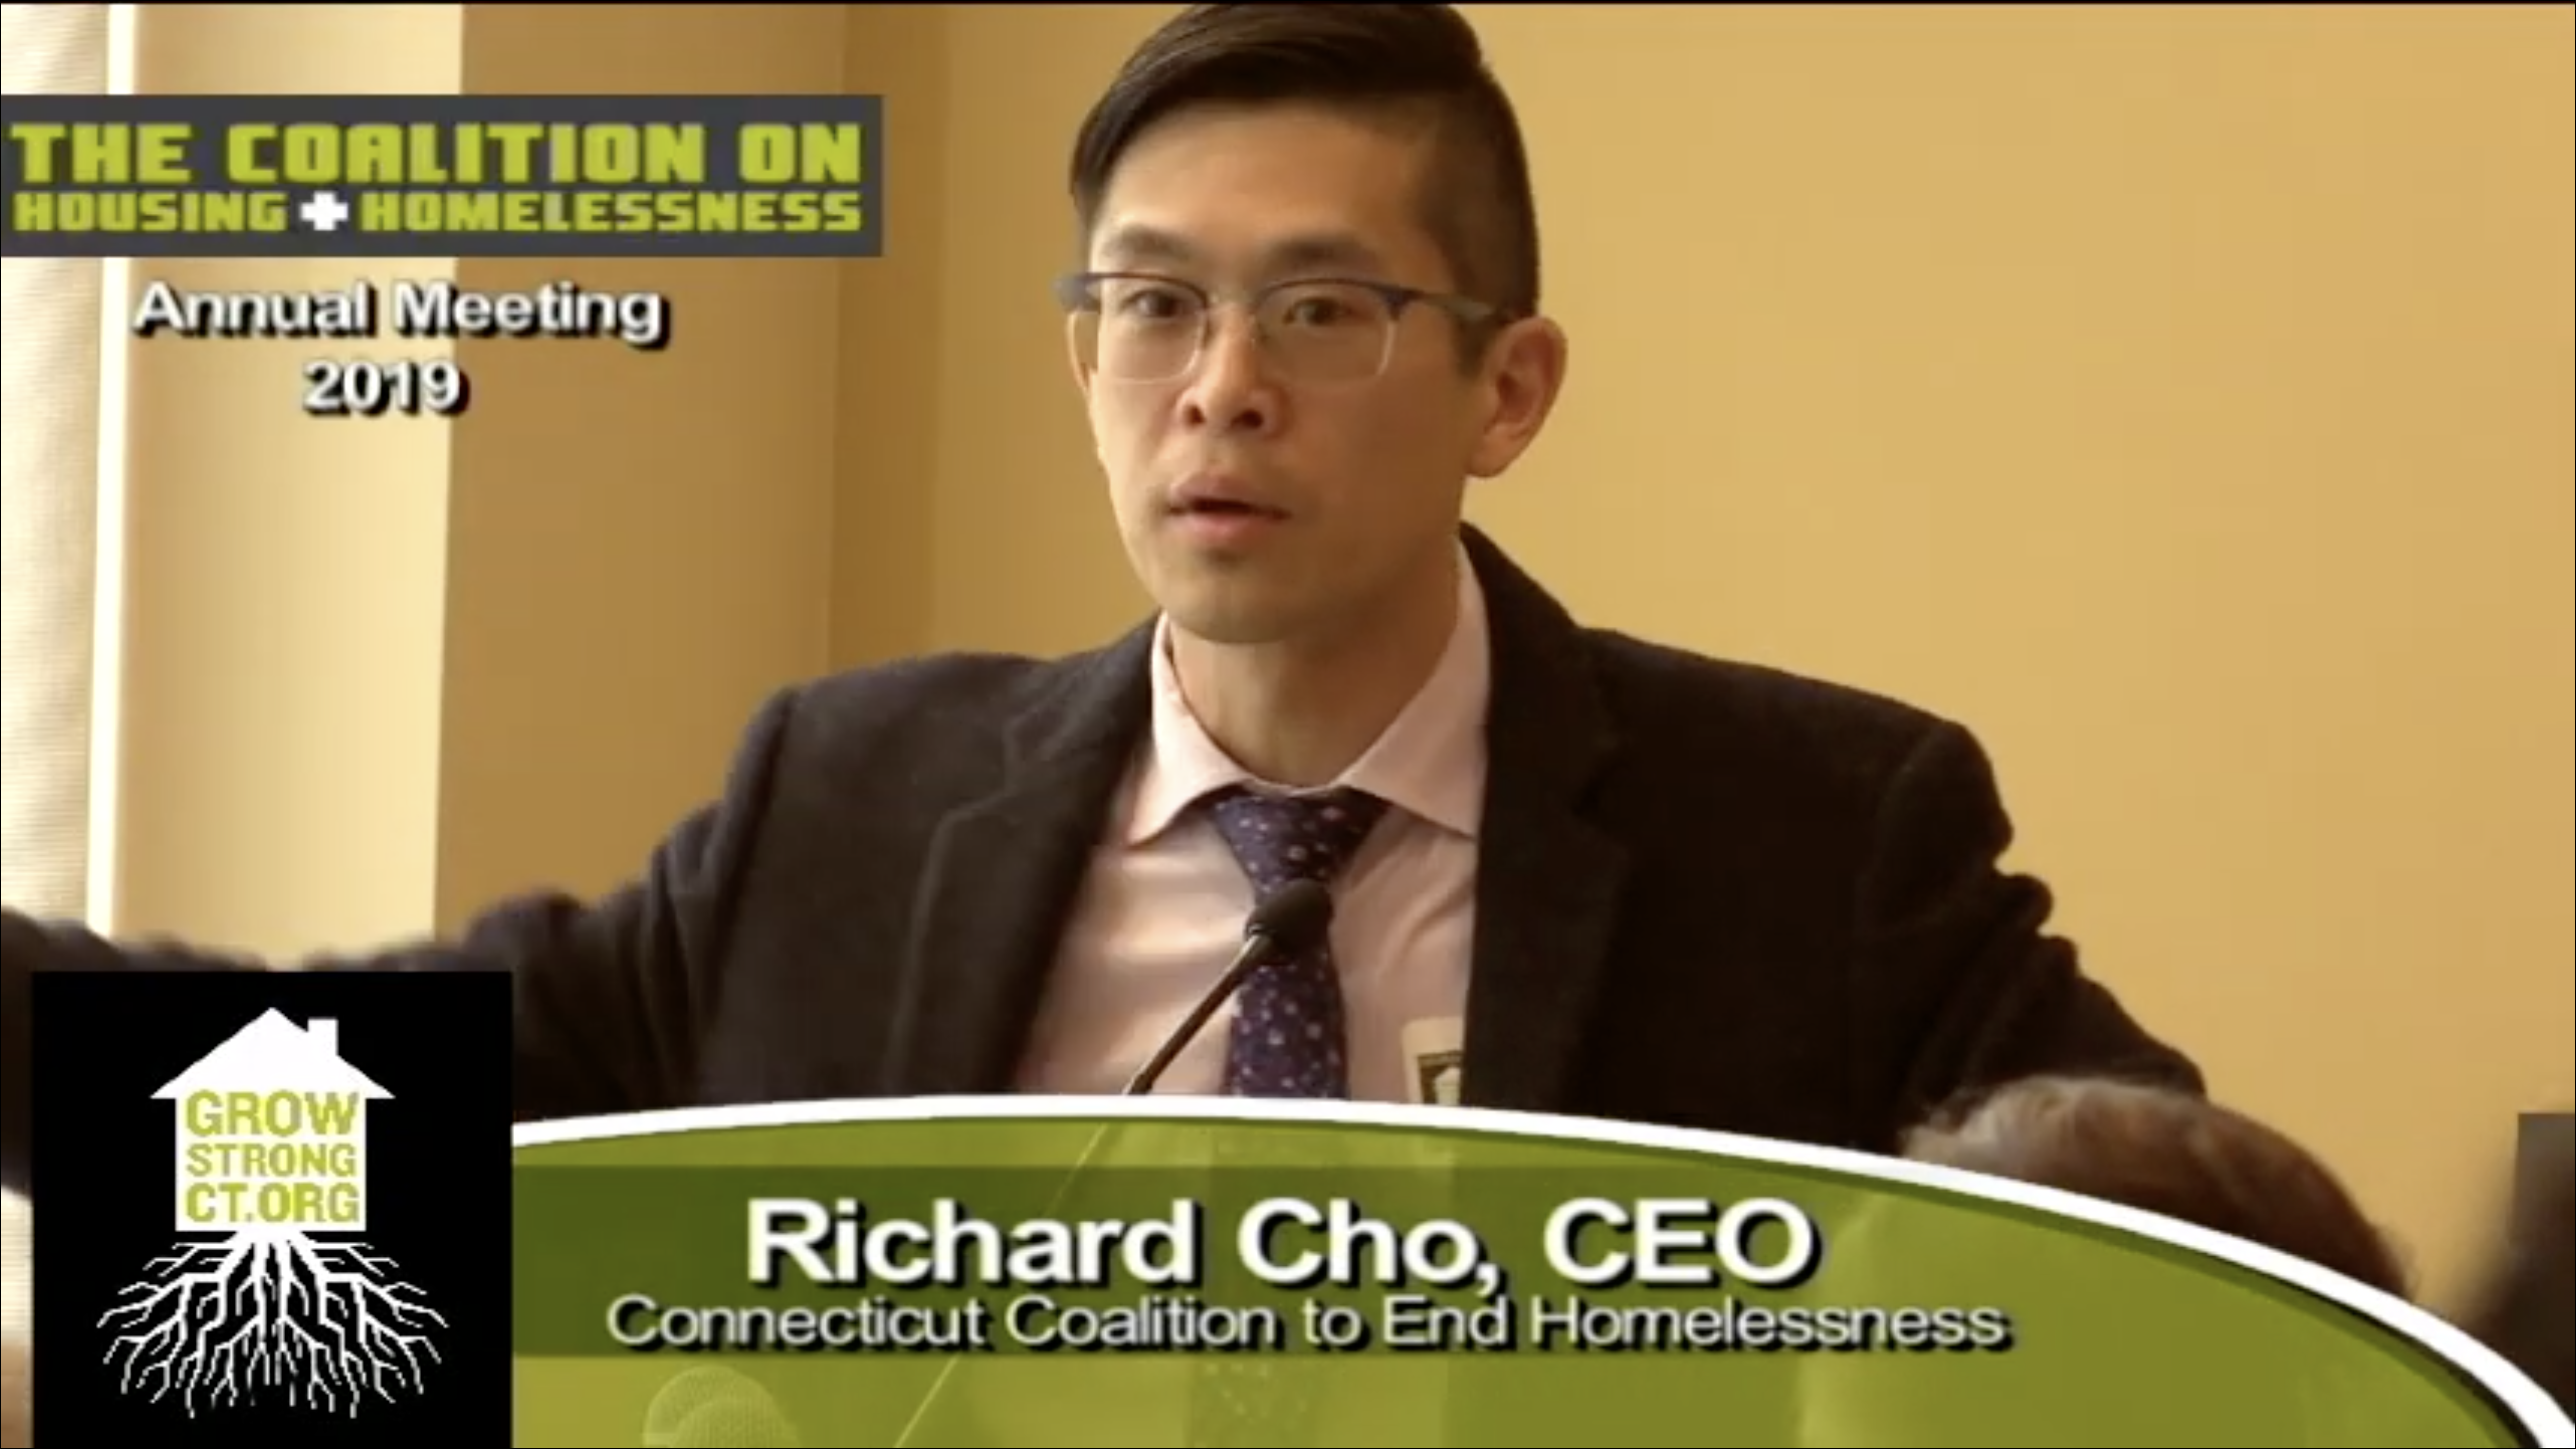 WATCH: Richard Cho Gives Keynote address at the CHH Annual Meeting from WPAA-TV and Community Media Center